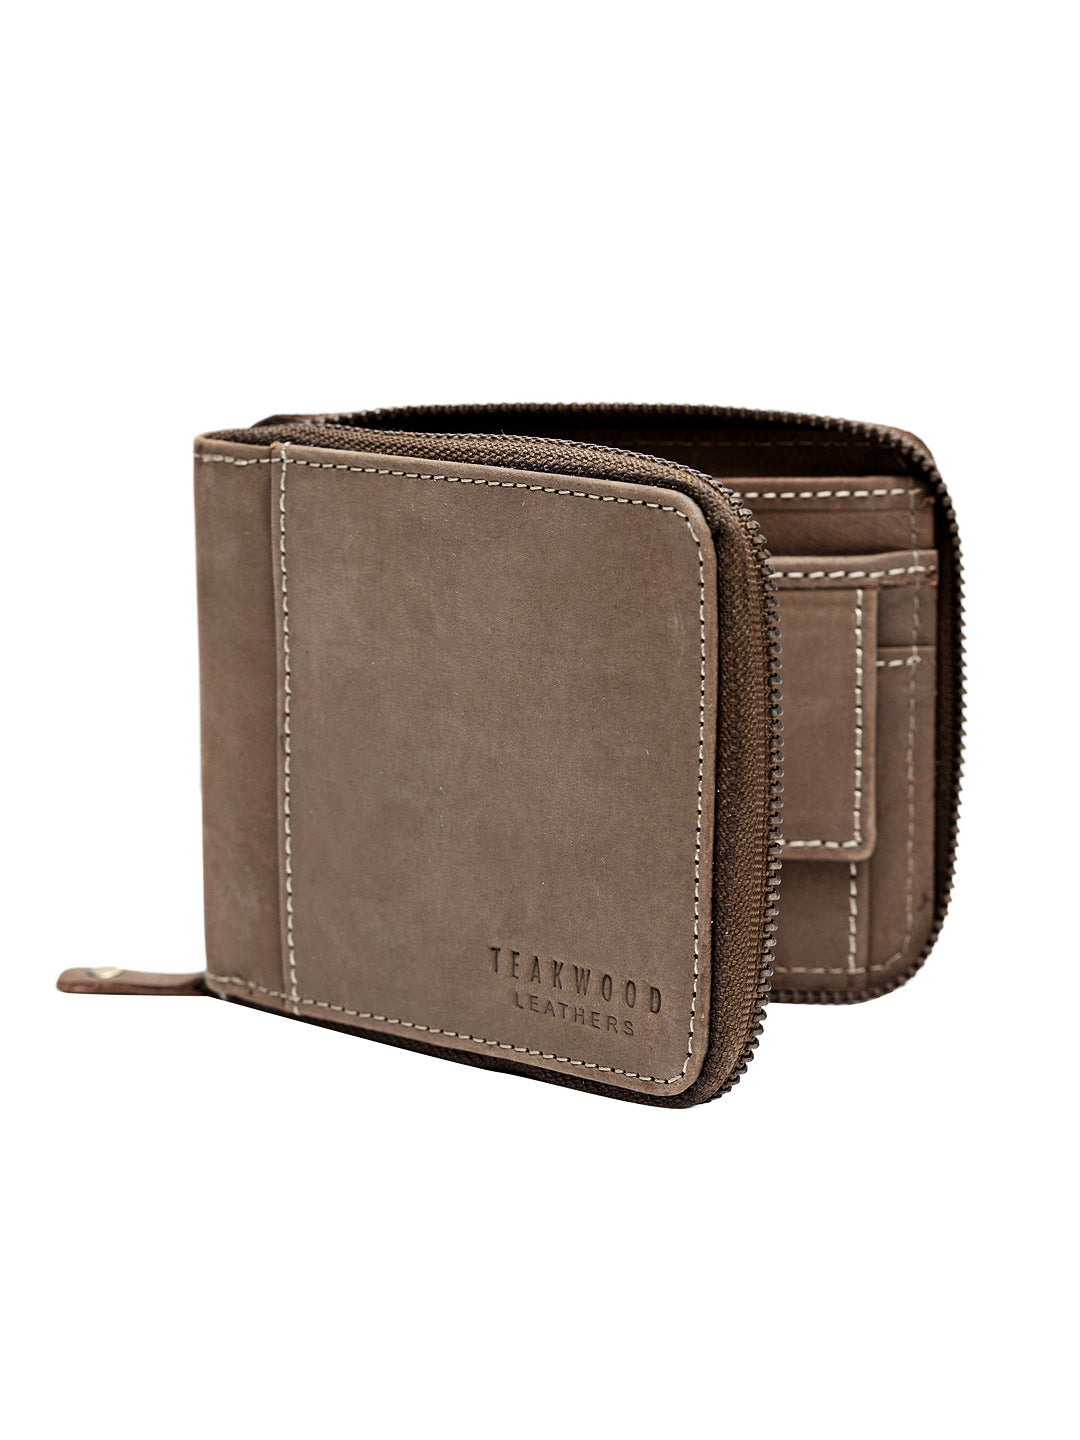 Vegetable Tanned Genuine Leather Minimalist Zipper Long Wallet for Men  Bifold Multi Card Case Slot Unisex Minimalist Purse Cluth Bag (Brown) :  Amazon.in: Bags, Wallets and Luggage